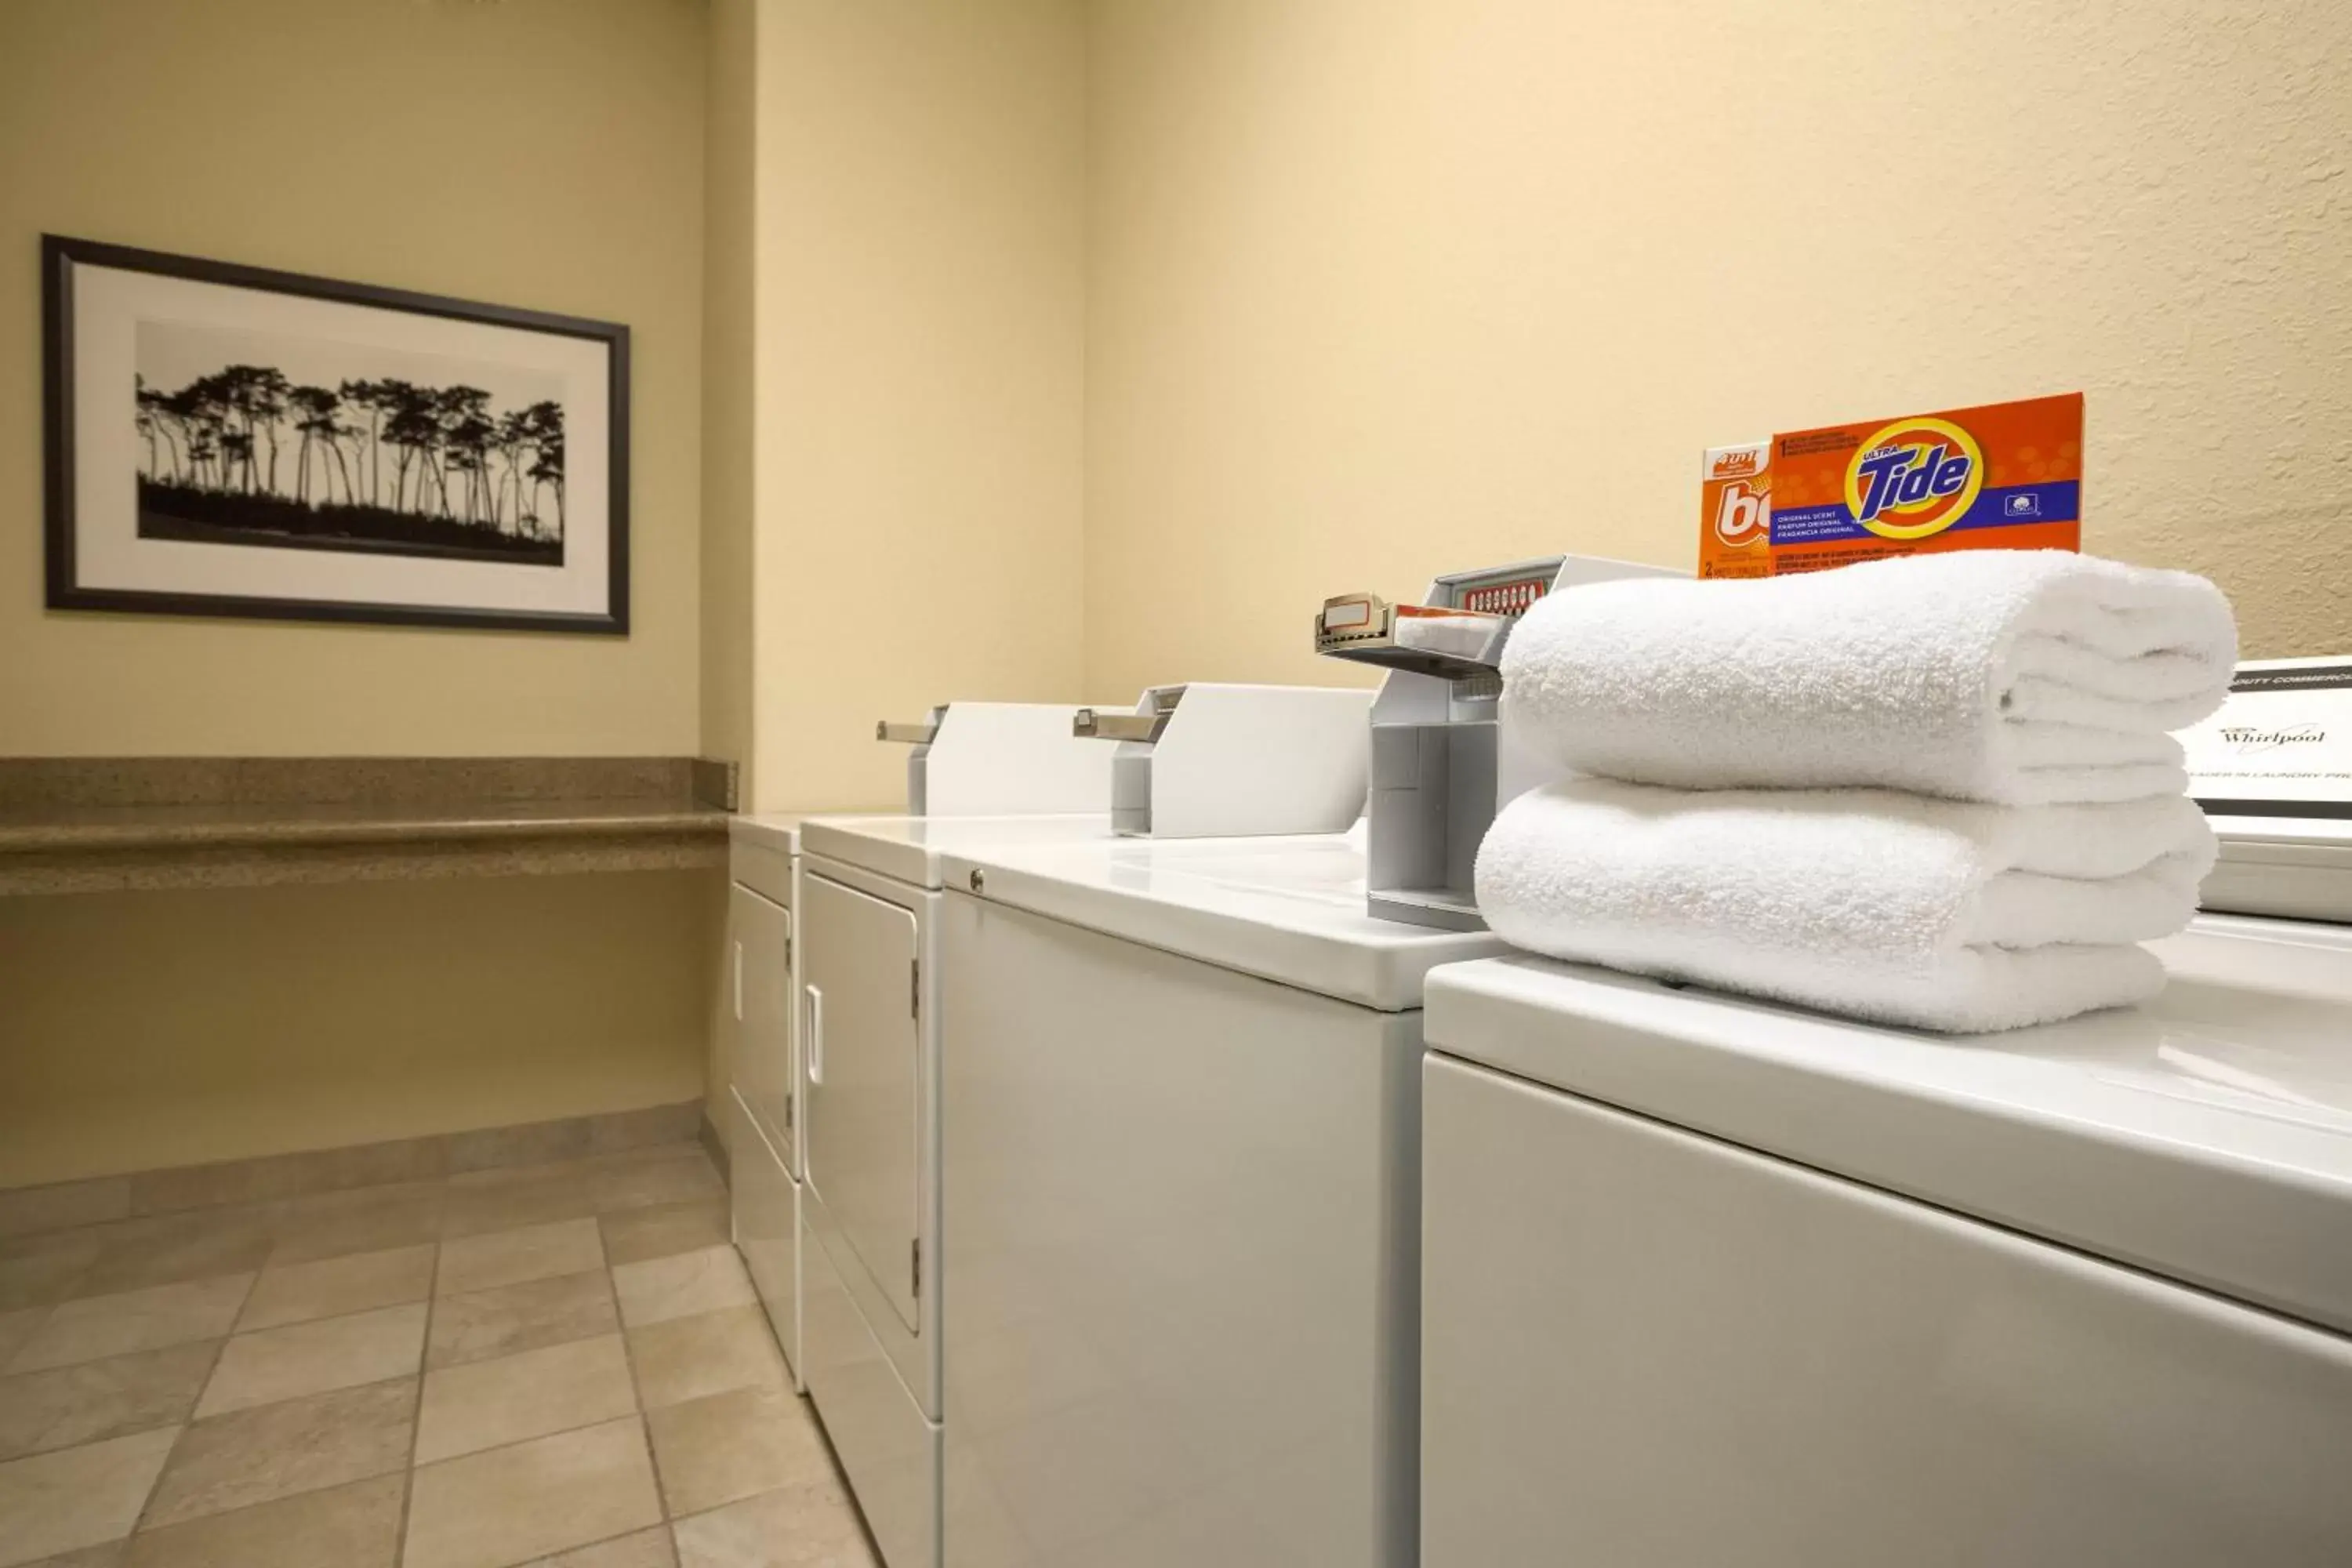 Area and facilities in Country Inn & Suites by Radisson, Kearney, NE